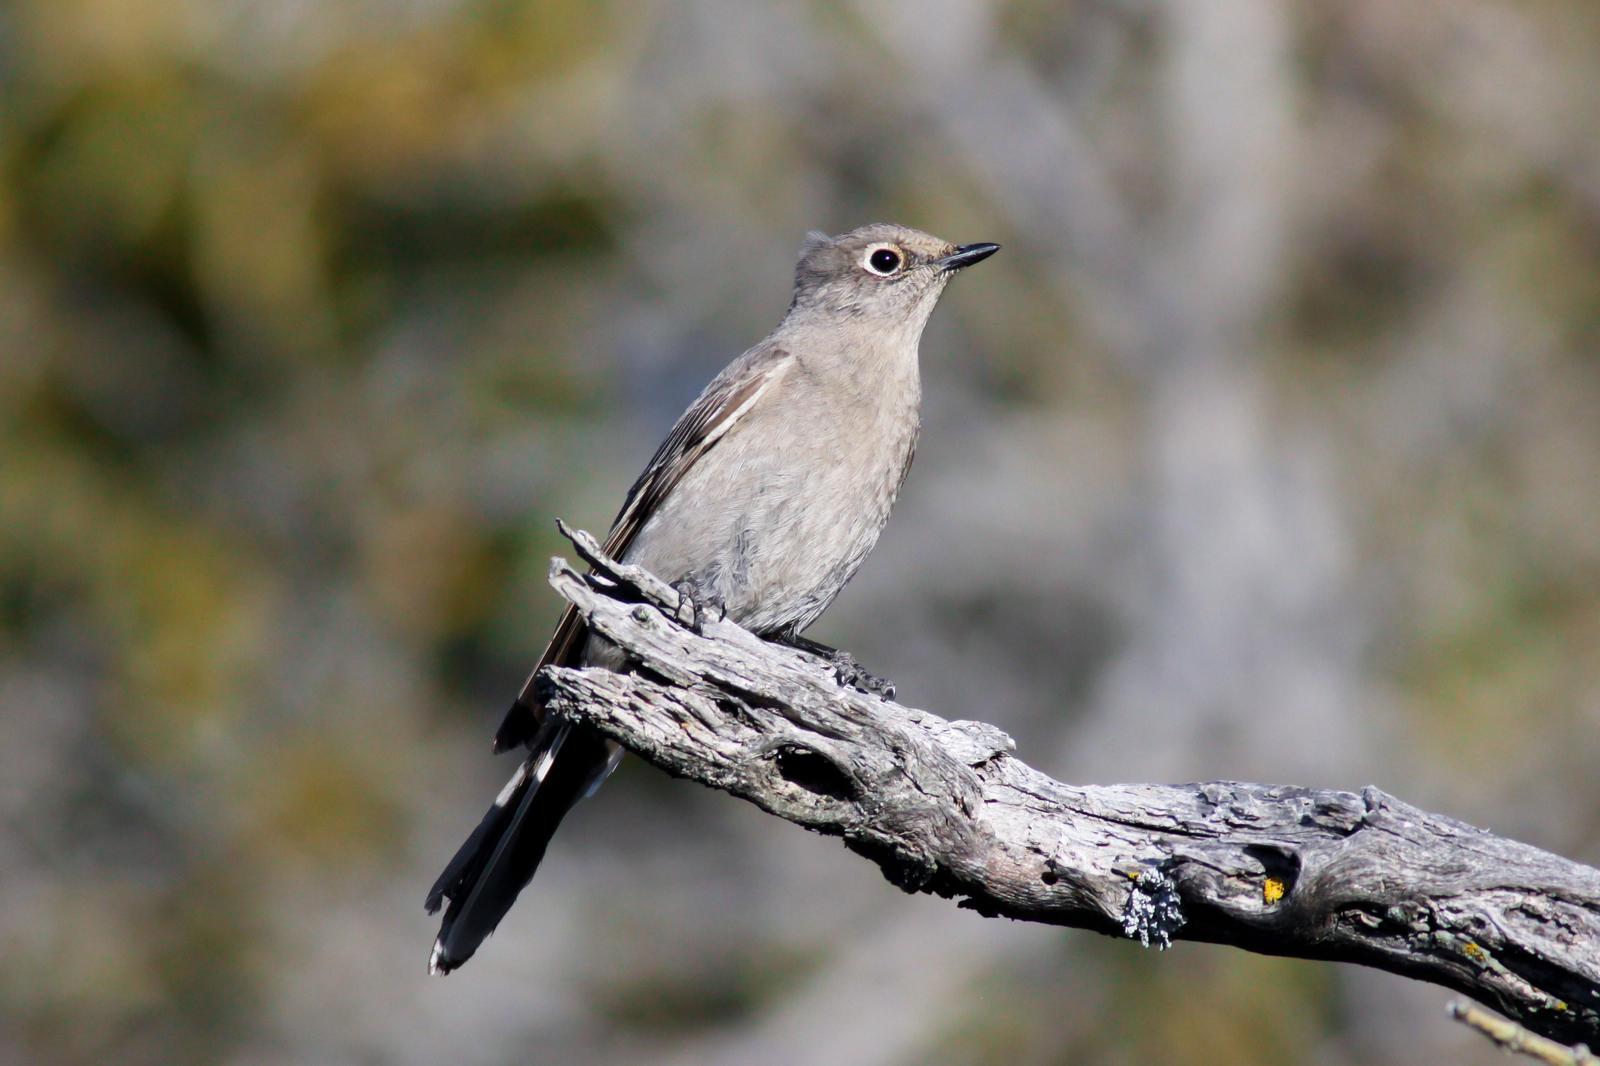 Townsend's Solitaire Photo by Tom Ford-Hutchinson